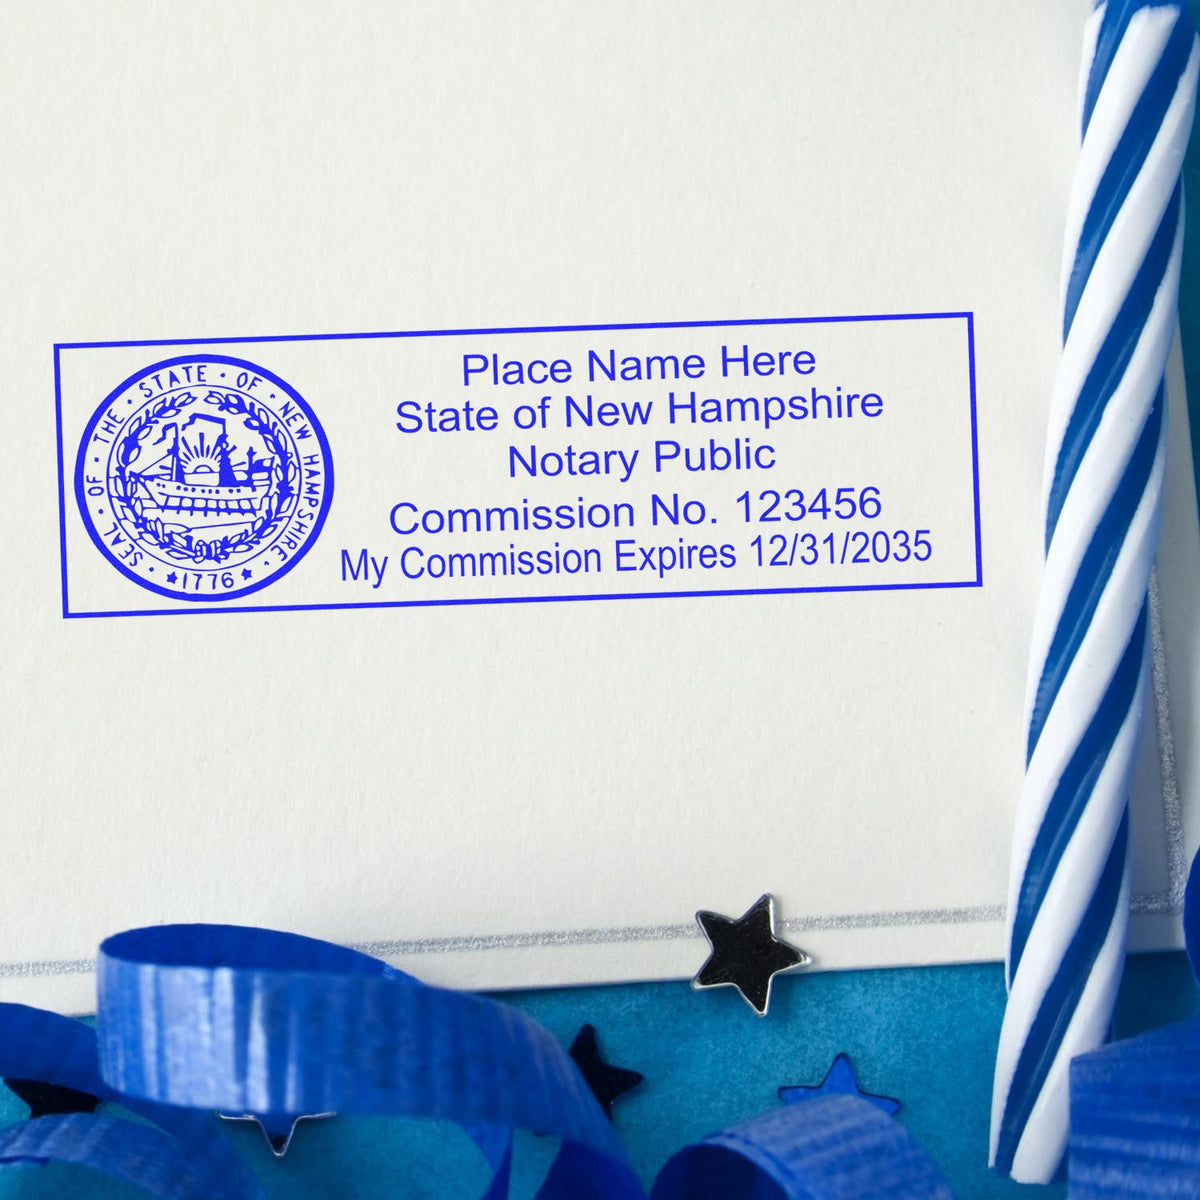 An alternative view of the Heavy-Duty New Hampshire Rectangular Notary Stamp stamped on a sheet of paper showing the image in use